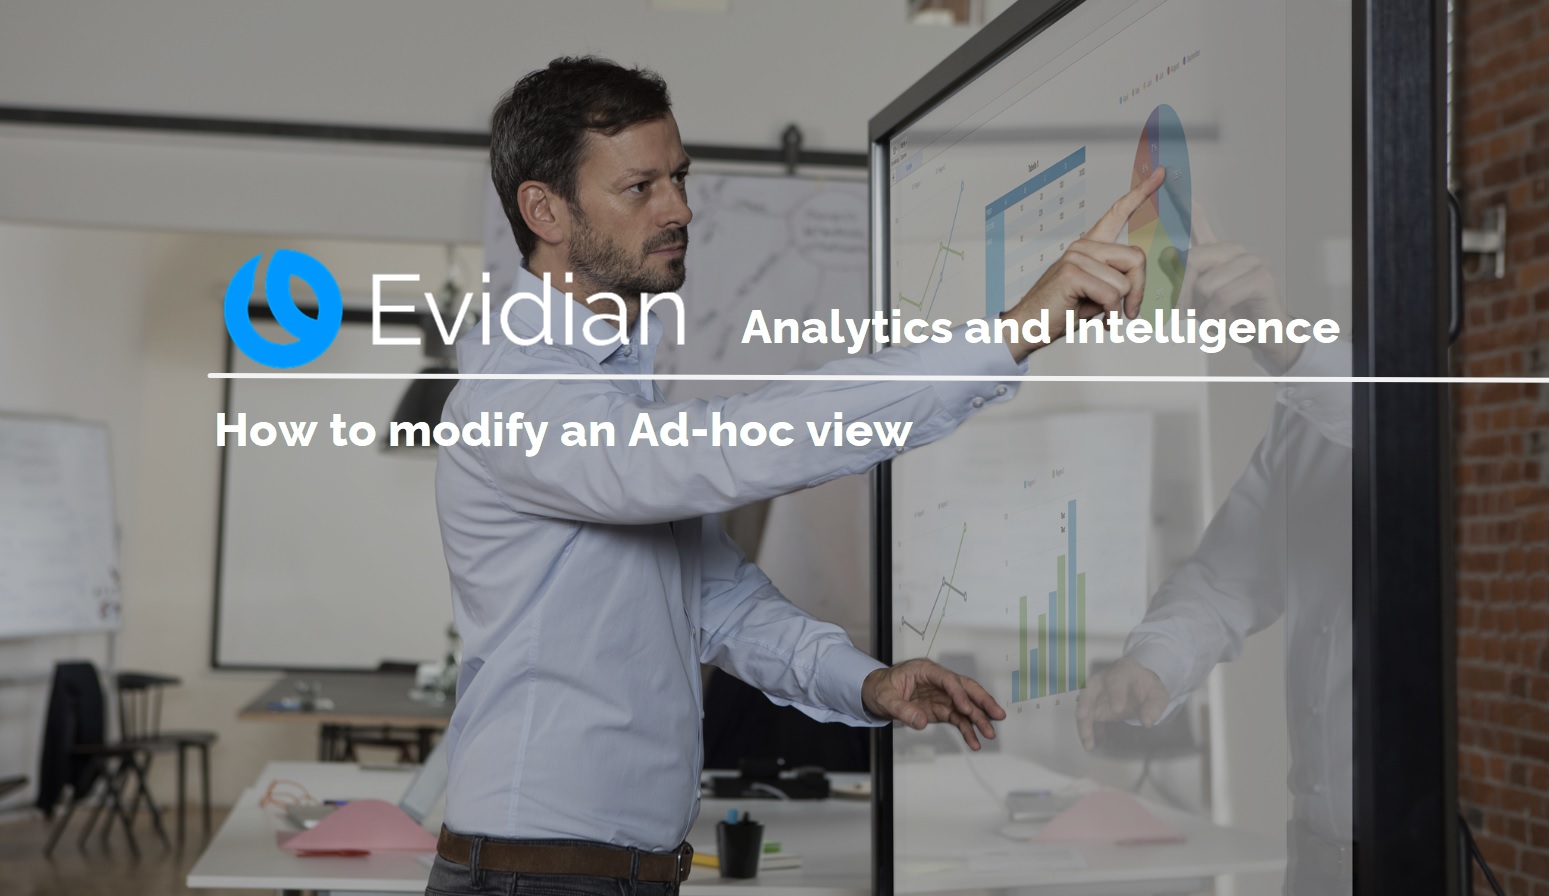 How to modify ad-hoc analytics views of Evidian IAM (Identity and Access Management)